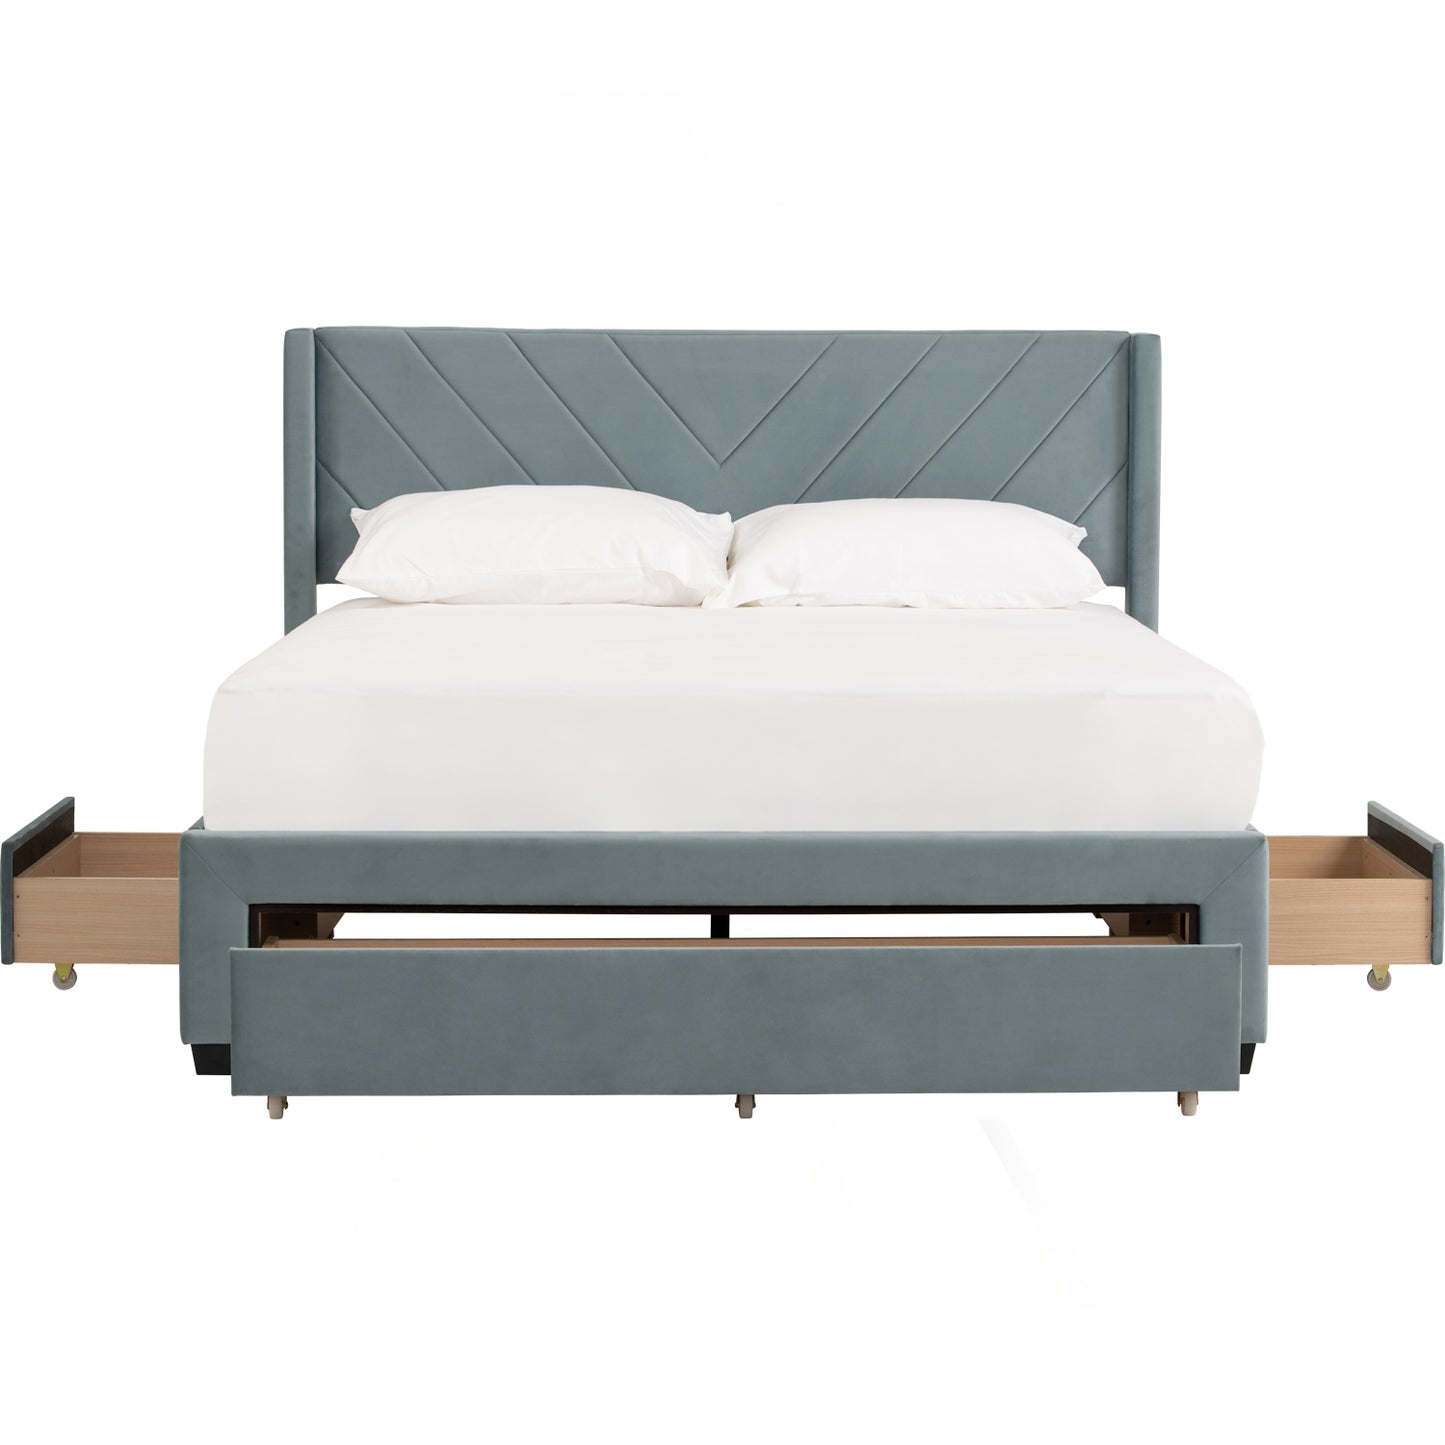 Tricia Queen Bed with Drawer Storage